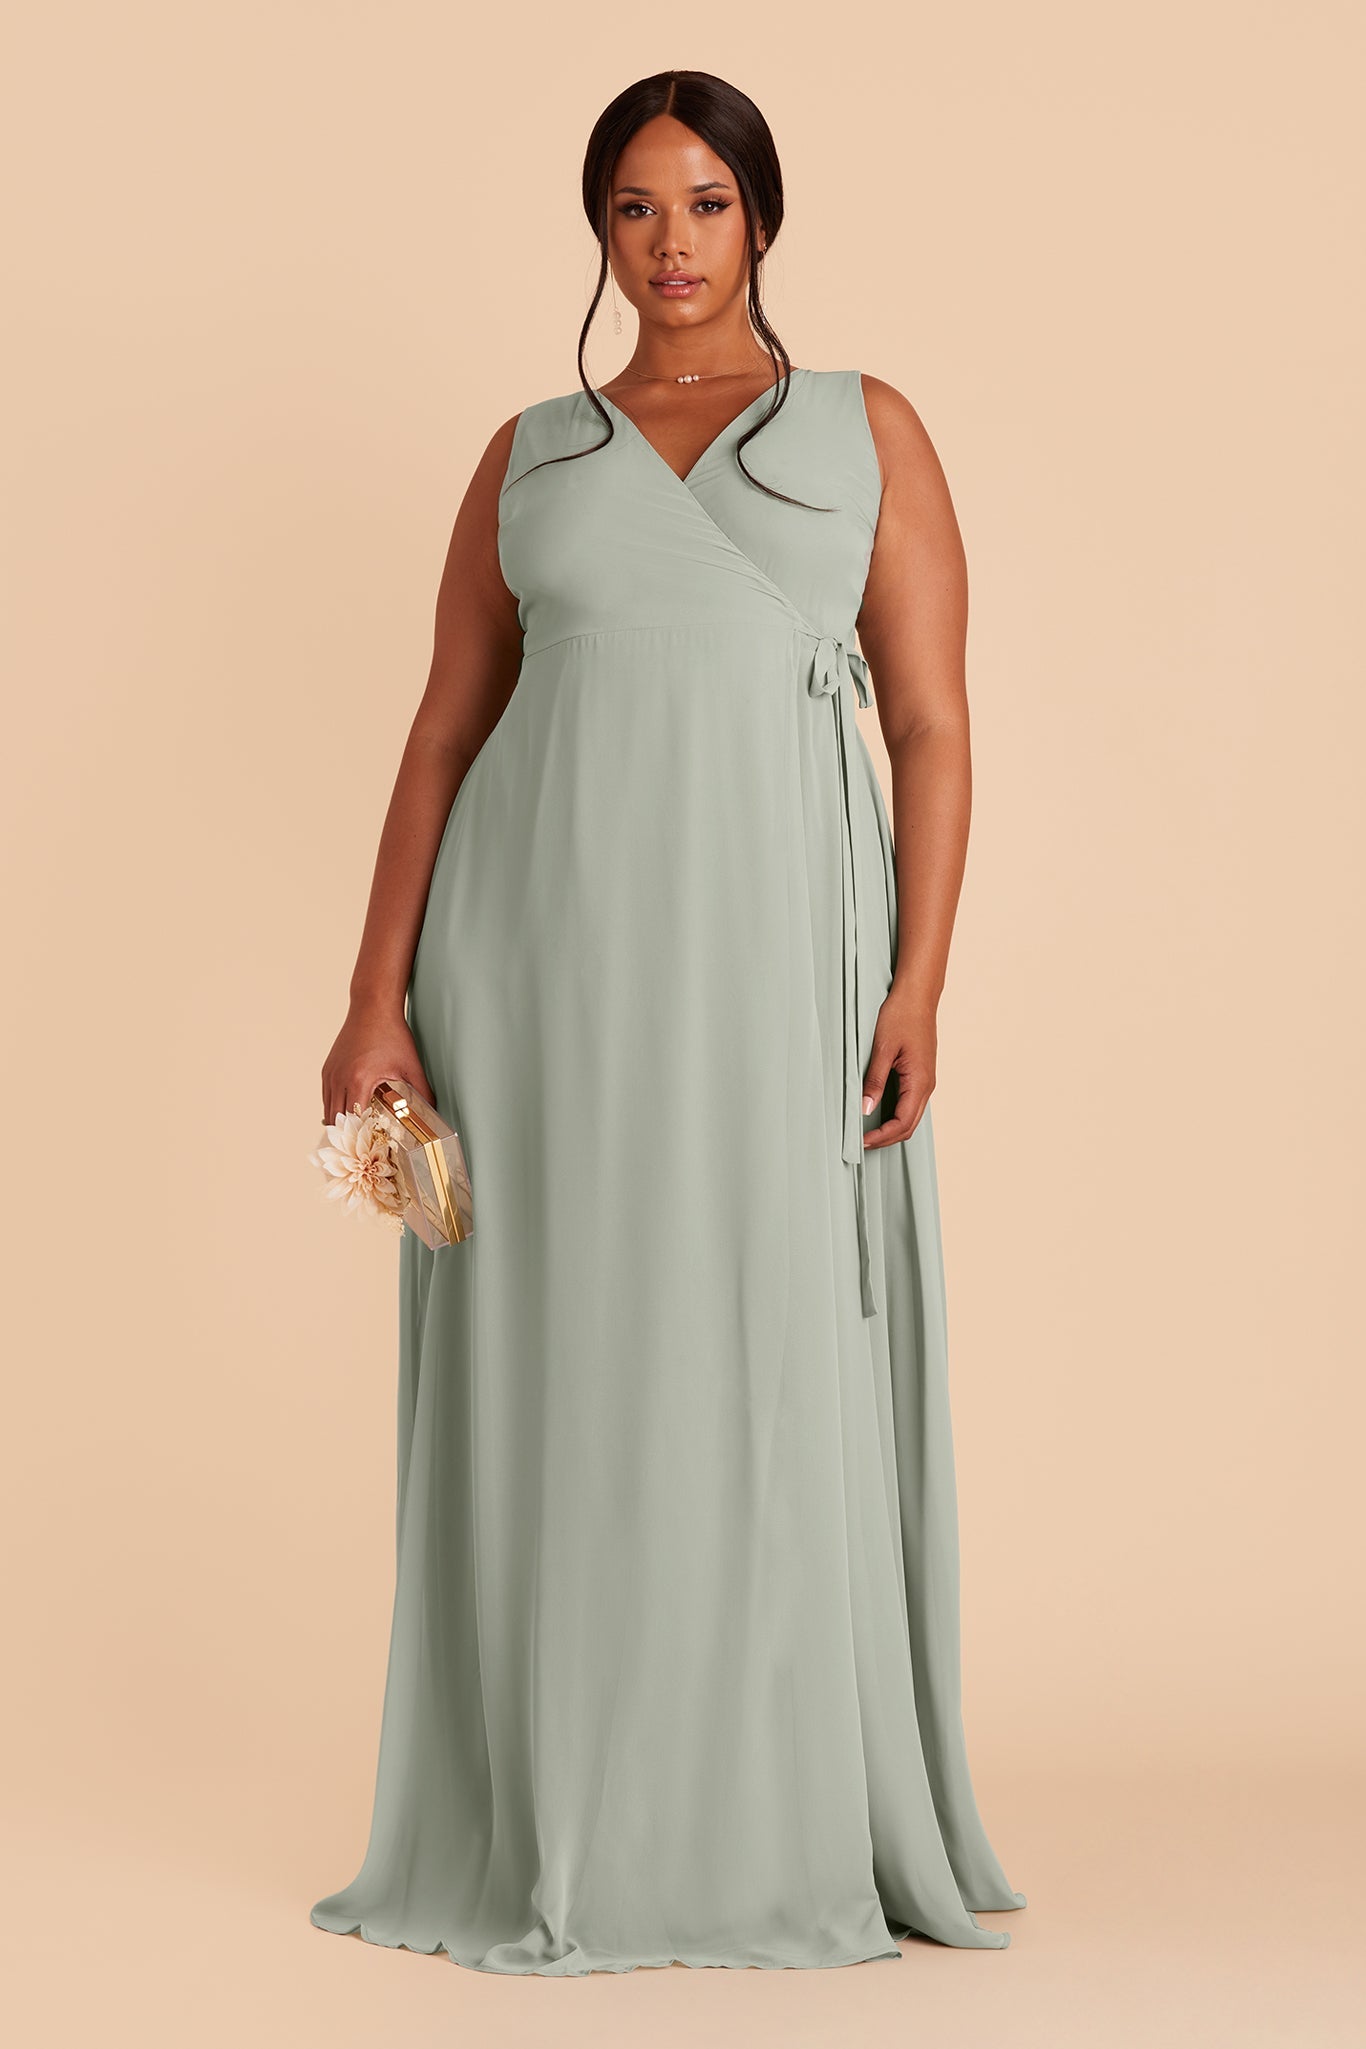 Plus Size Party Dresses Ideas: It's Time for The Curves - Ever-Pretty US